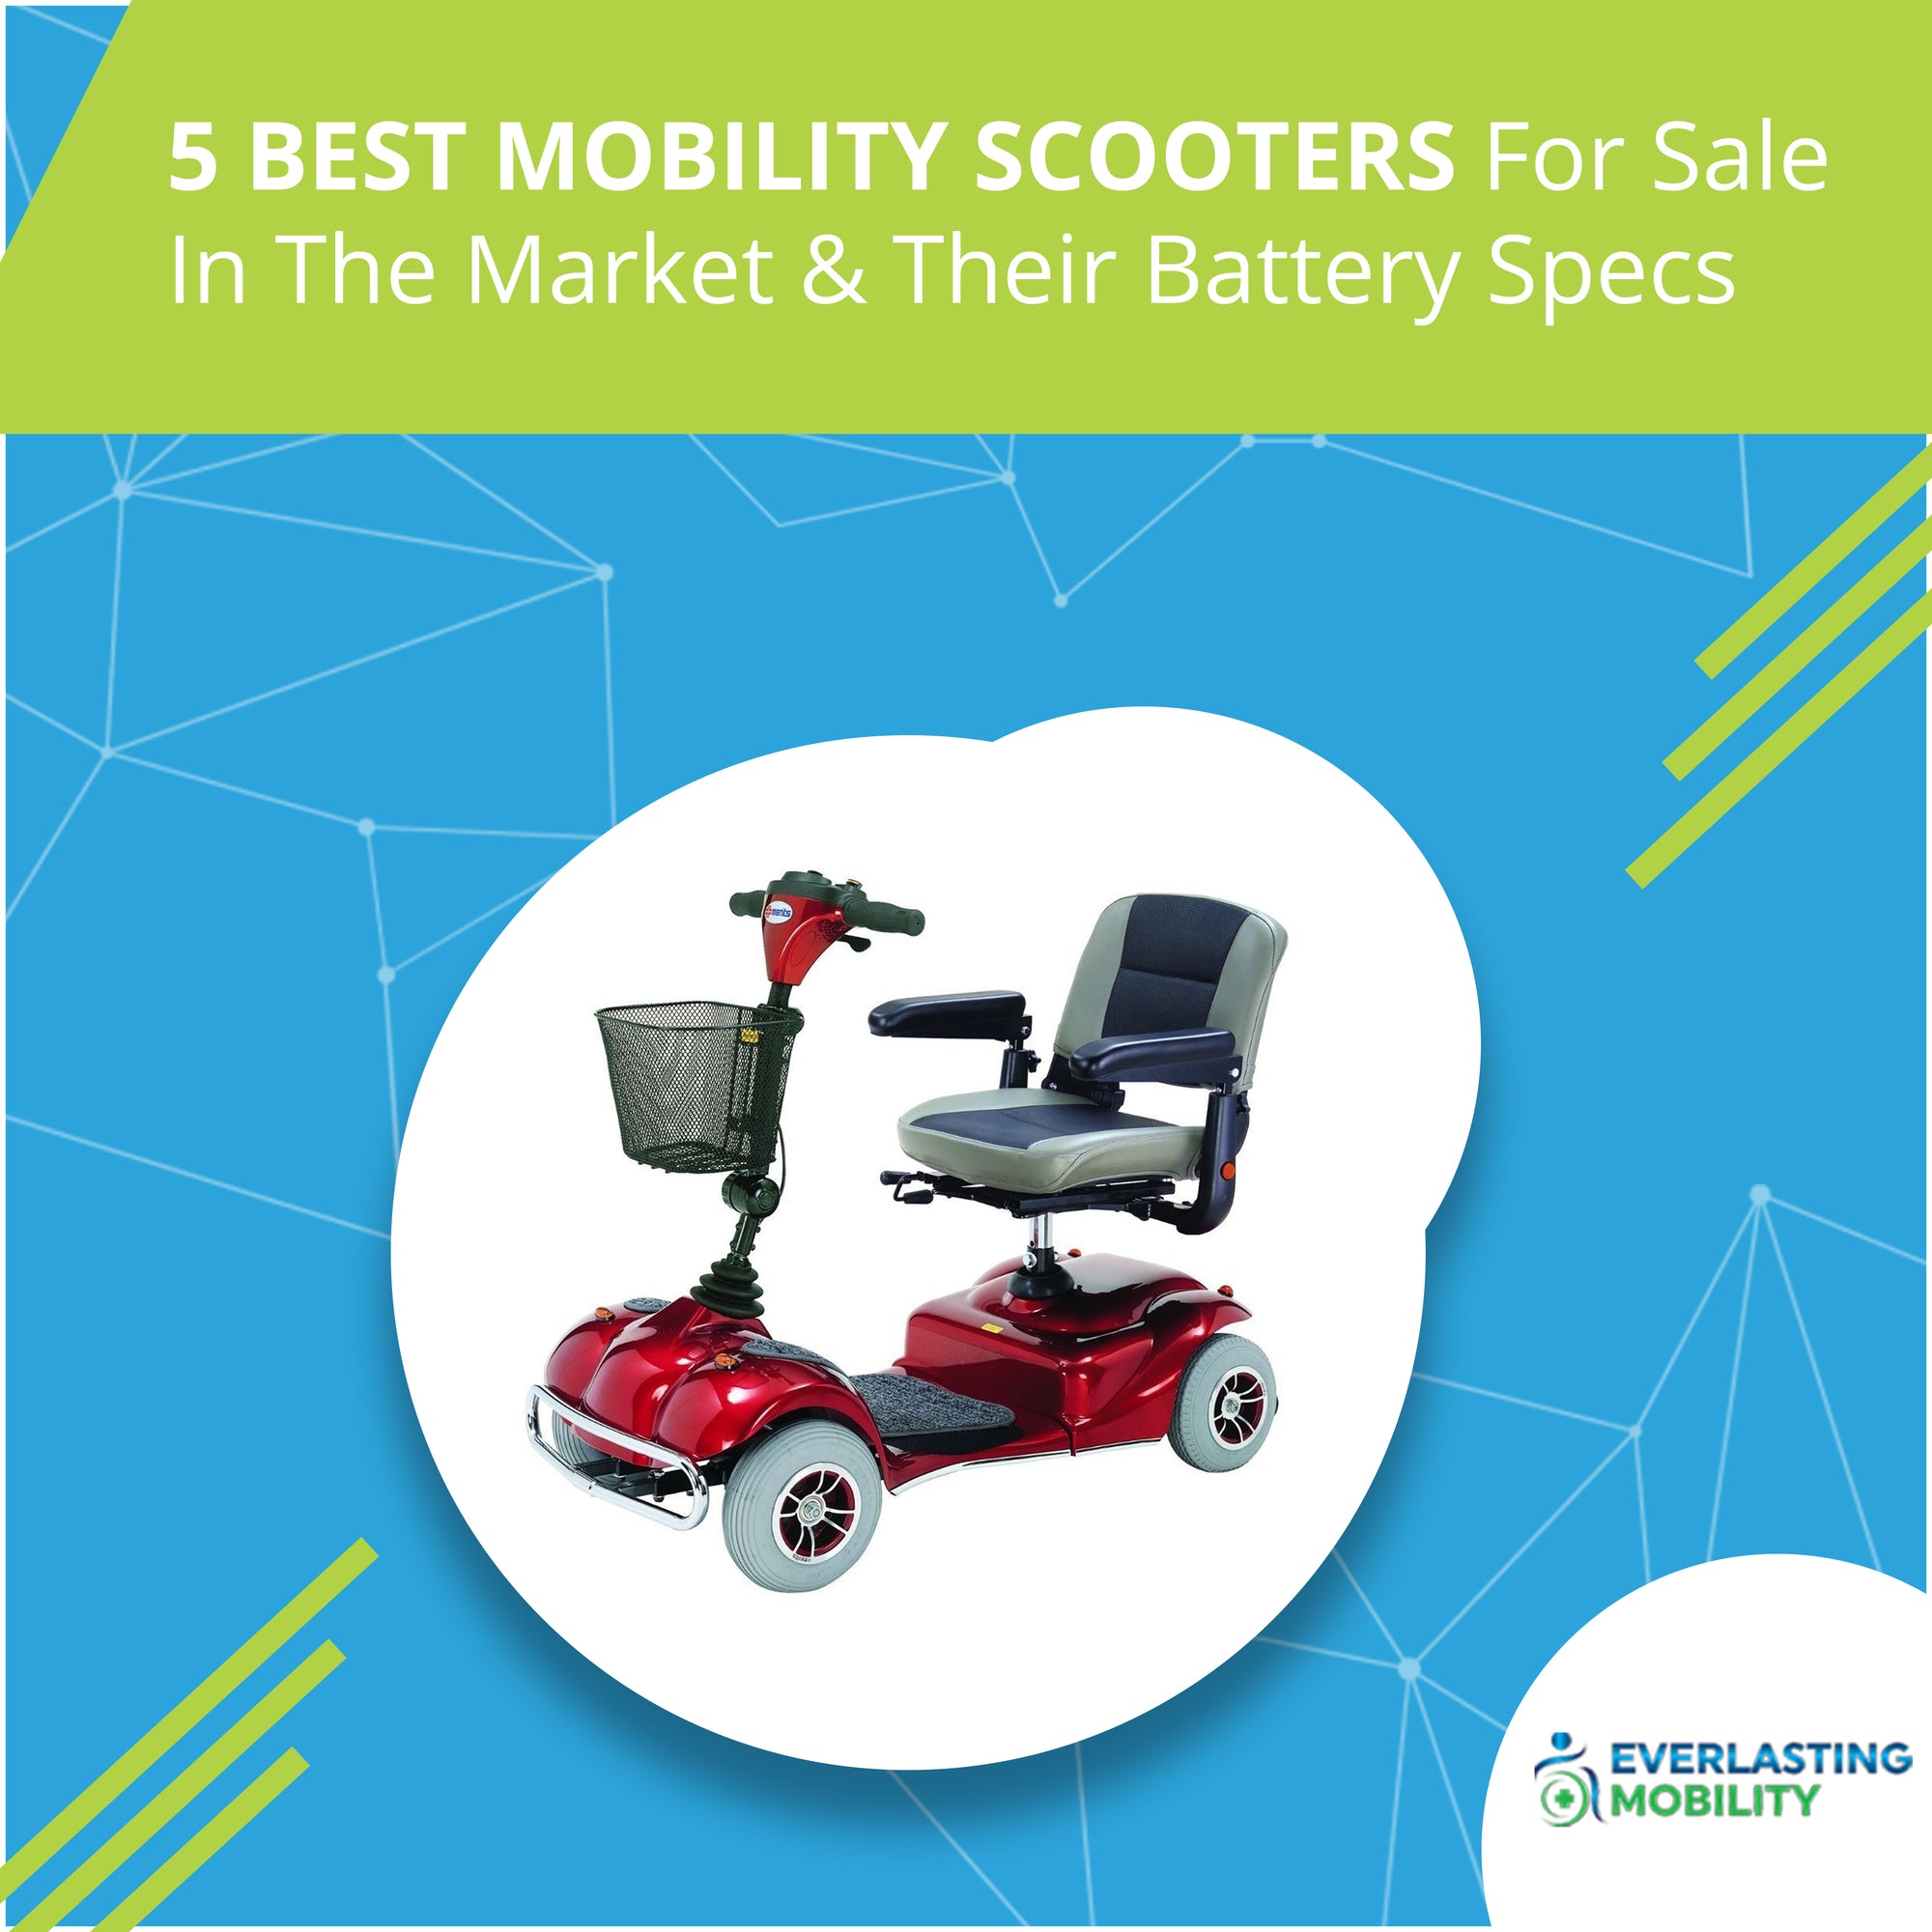 5 best mobility scooters for sale in the market and their battery specs